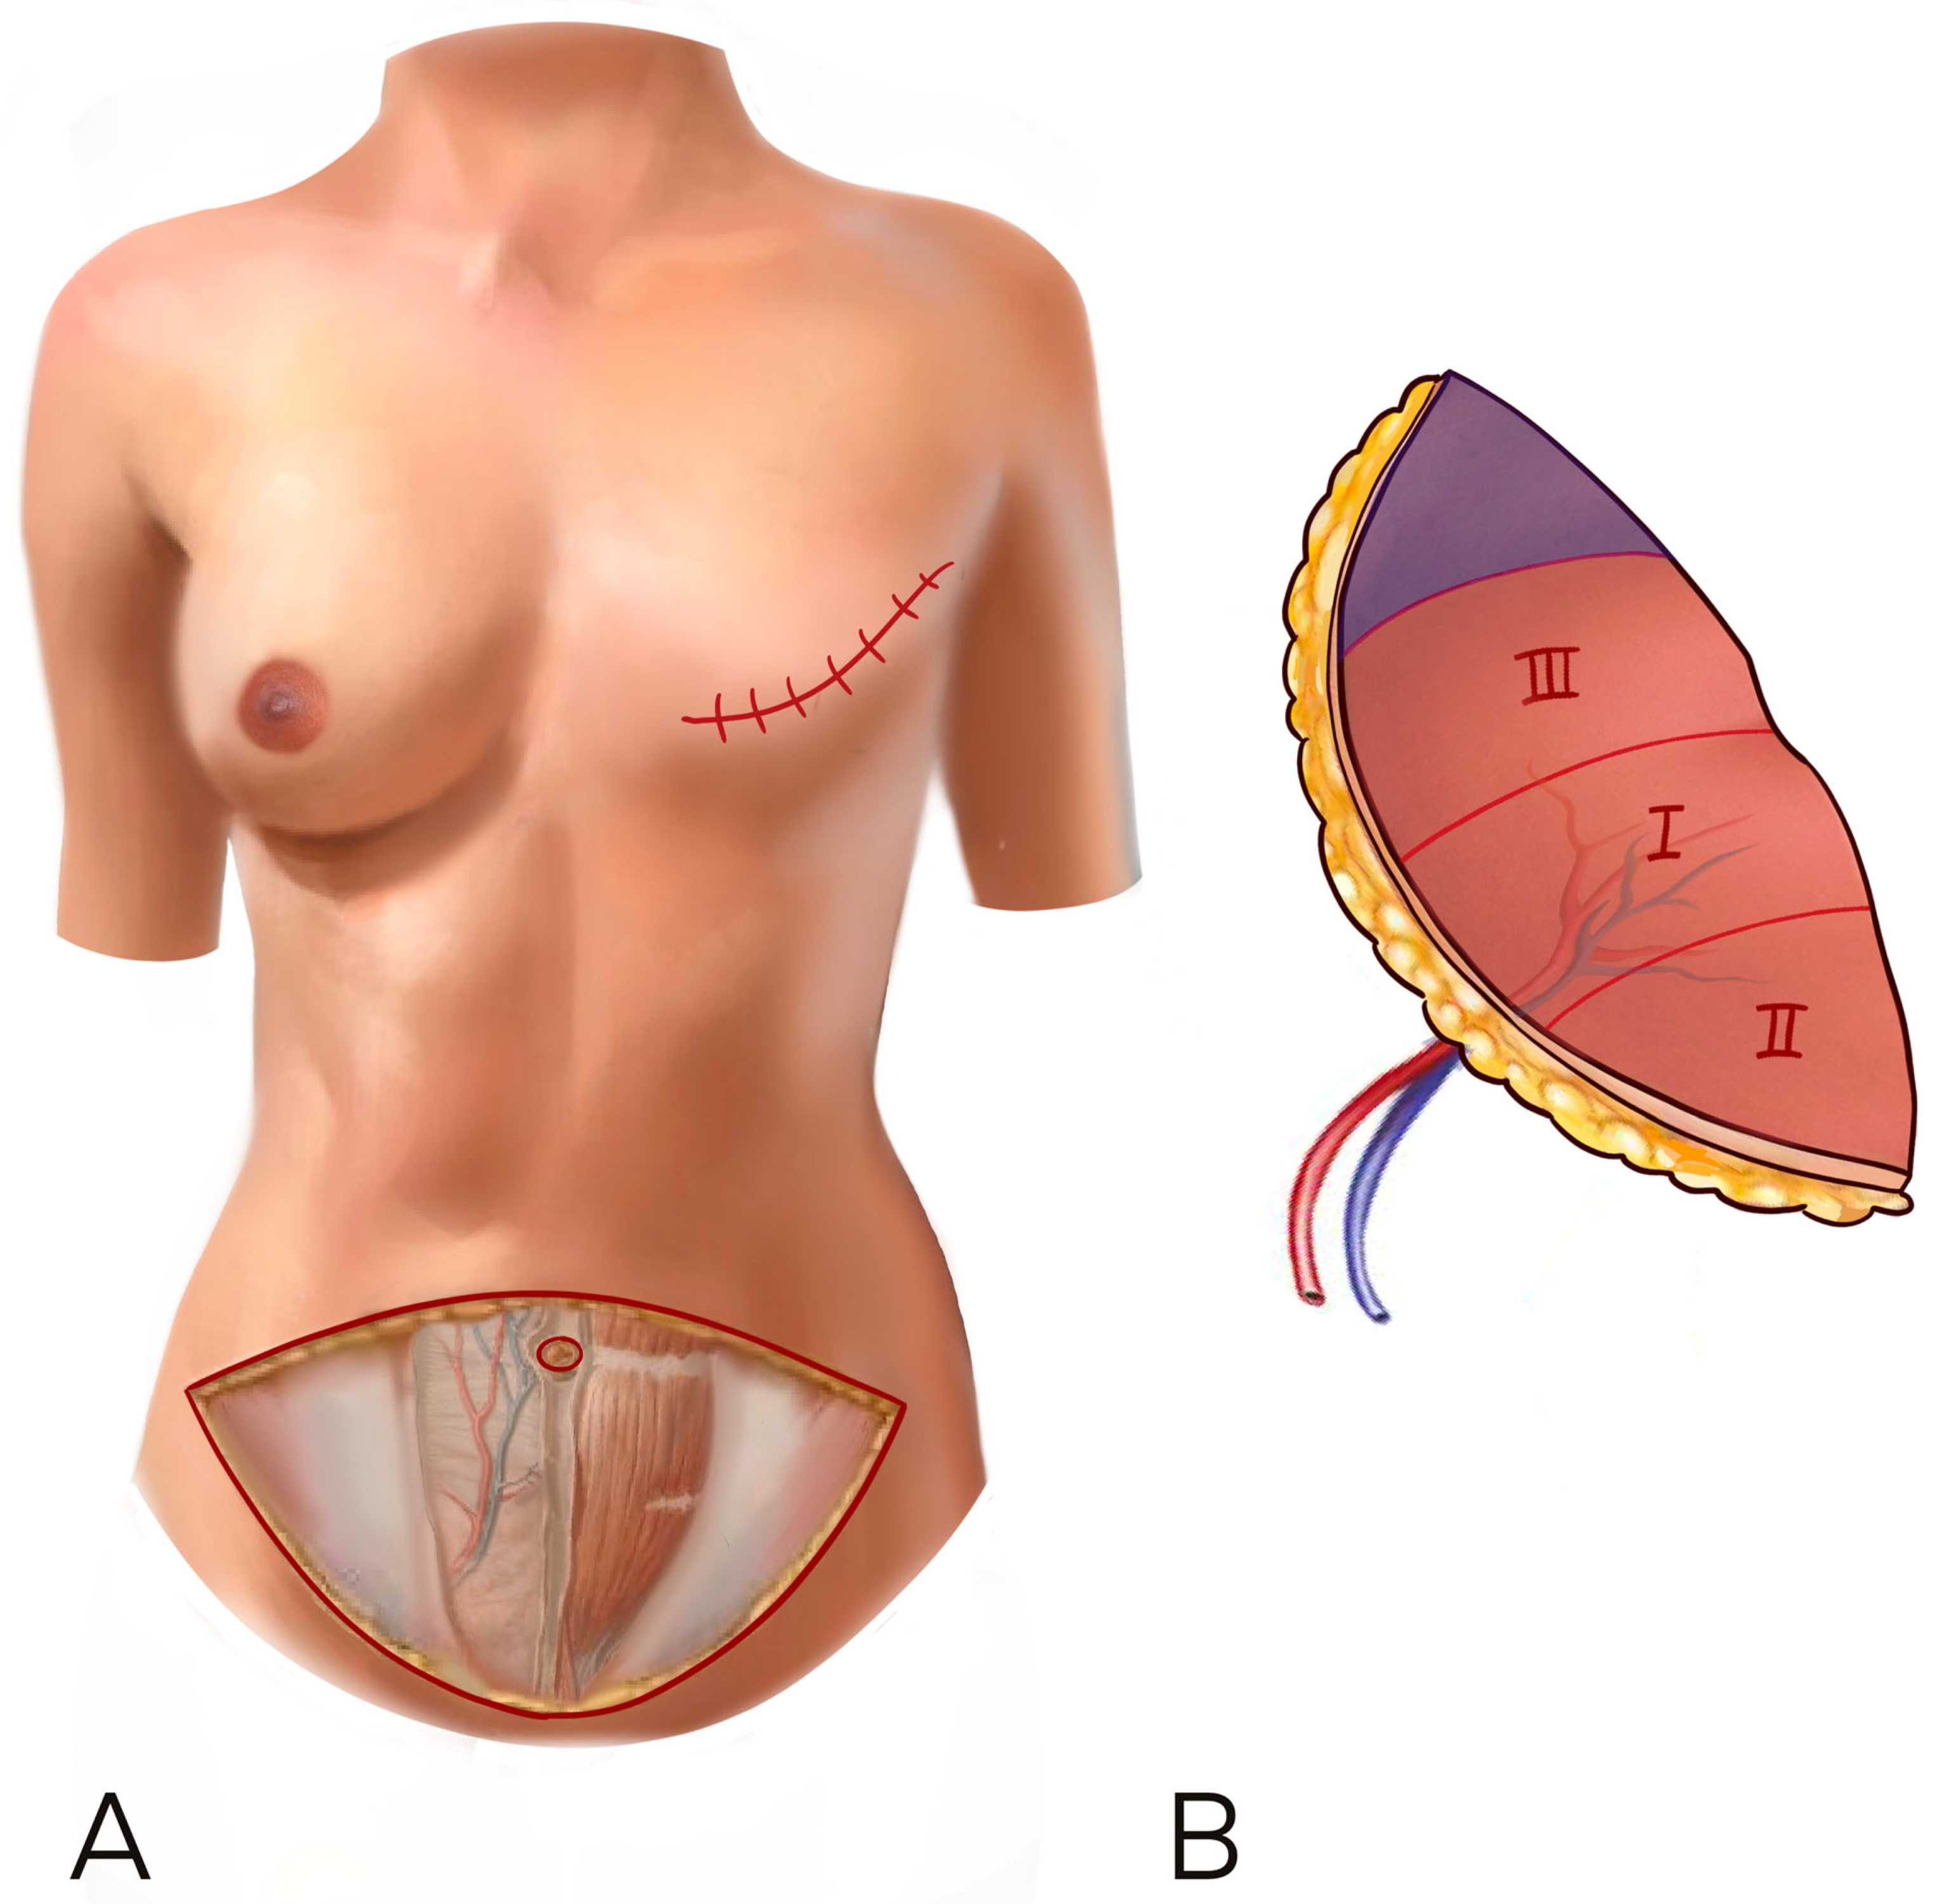 PDF] A Revision Restoring Projection after Nipple Reconstruction by Burying  Four Triangular Dermal Flaps